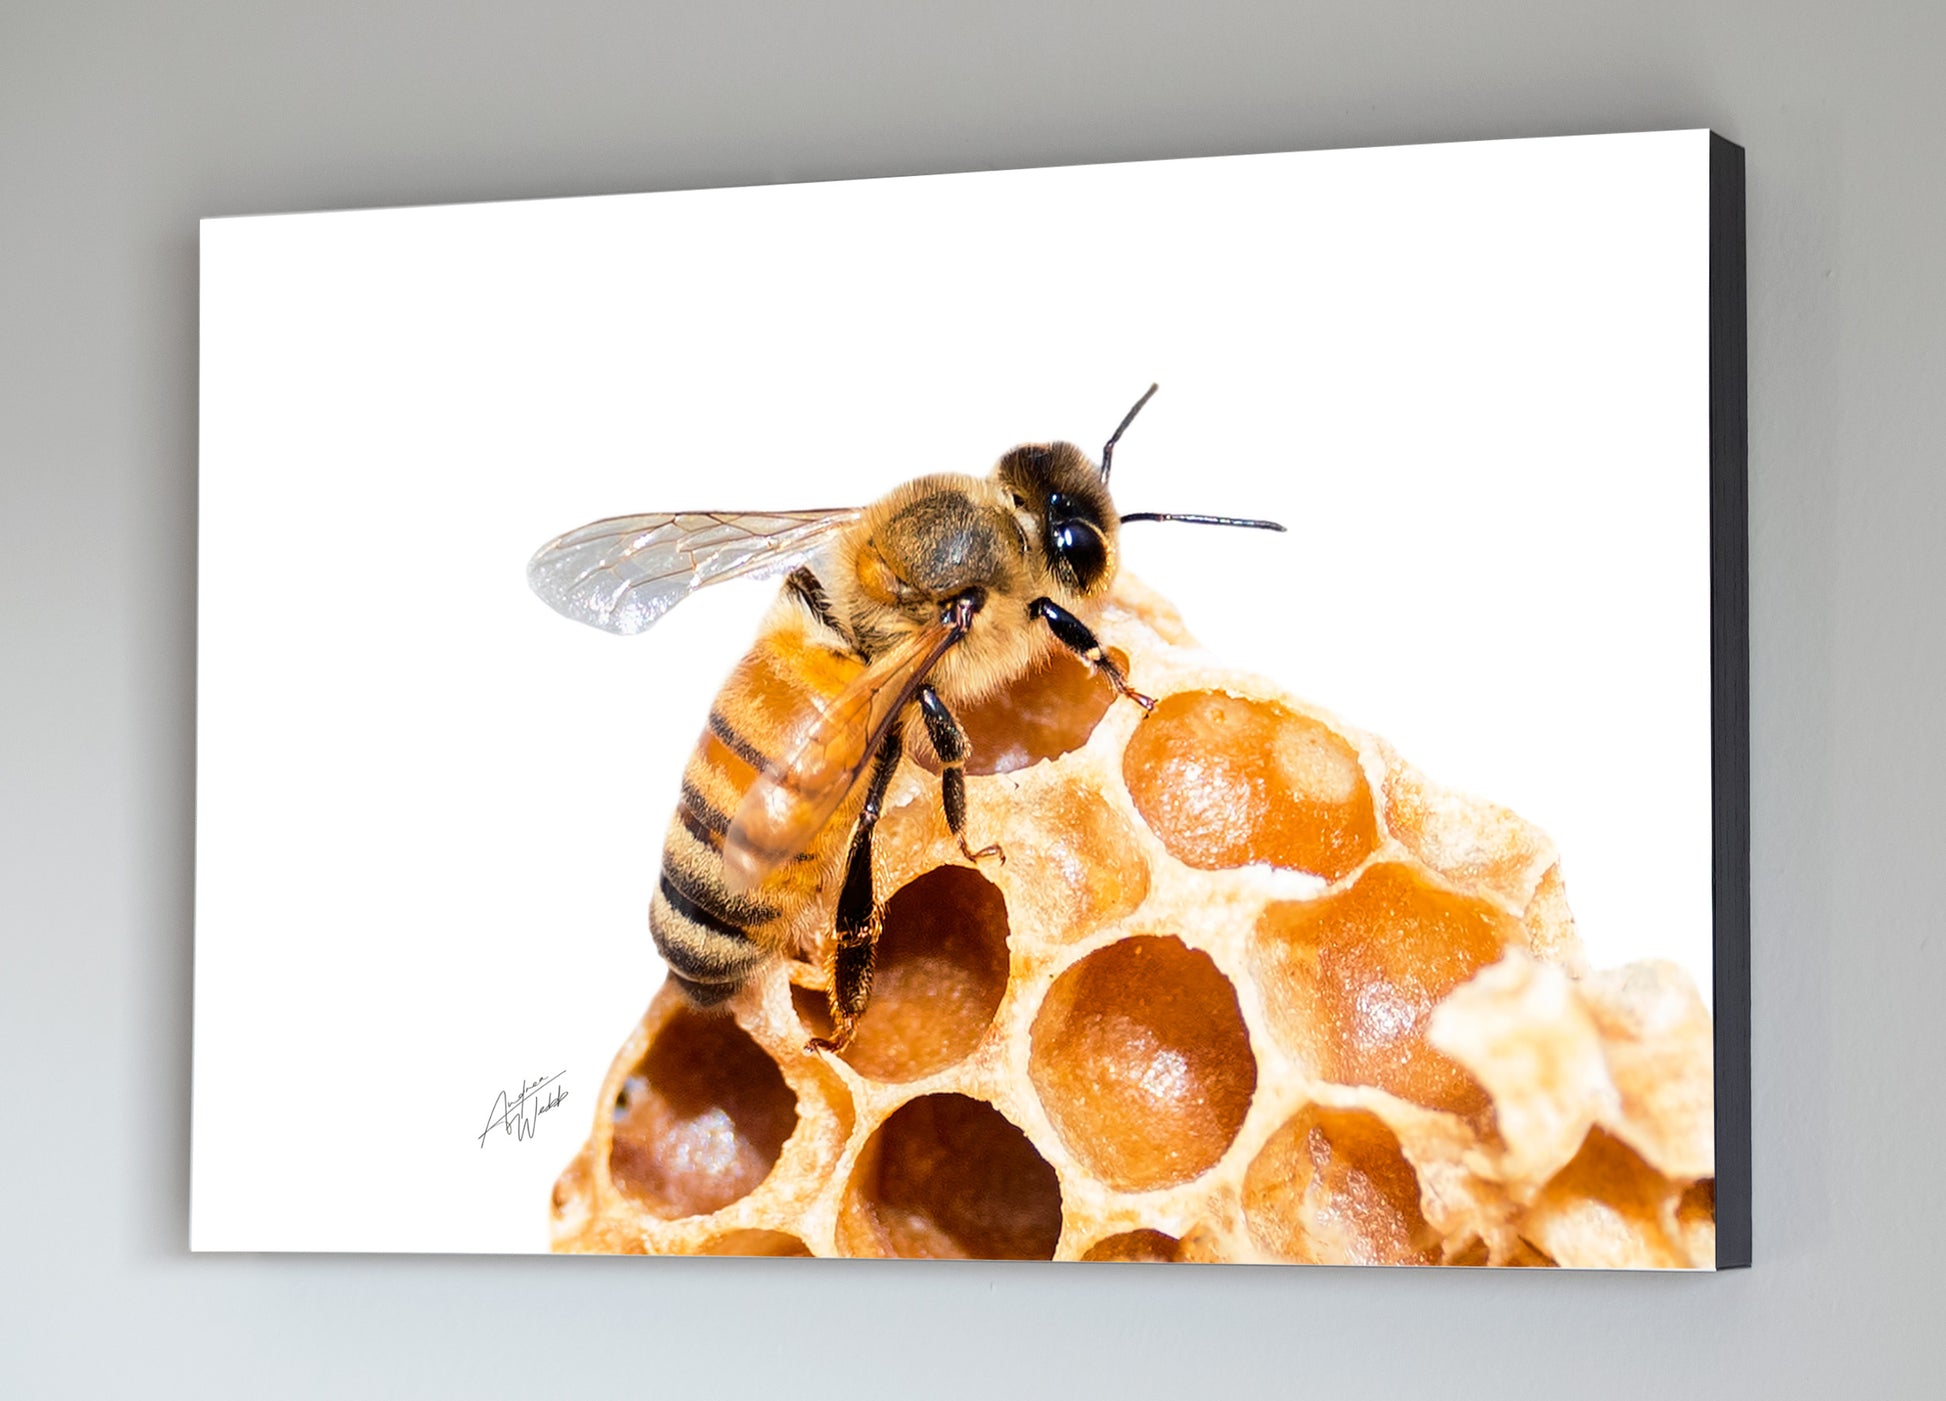 The honey bee is on a white background and is perched atop a comb, giving a realistic and detailed portrait of these fascinating creatures. Honey Bee art. Honey bee wall art. Honey bee portrait. Honey bee prints. Animal Photography. Bee art. Bee artwork. Bee gifts. Bee prints. Bee canvases.